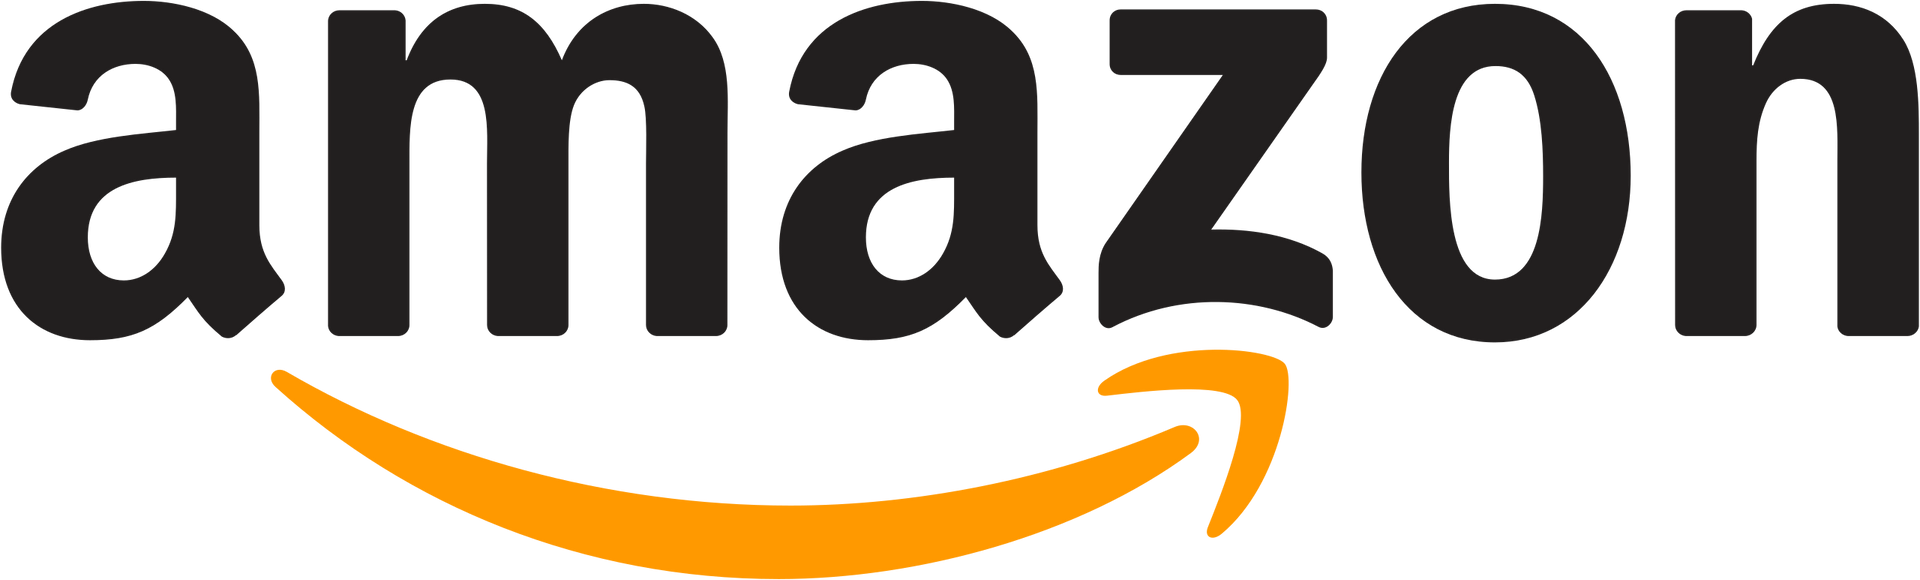 the amazon logo is black and orange with a yellow arrow